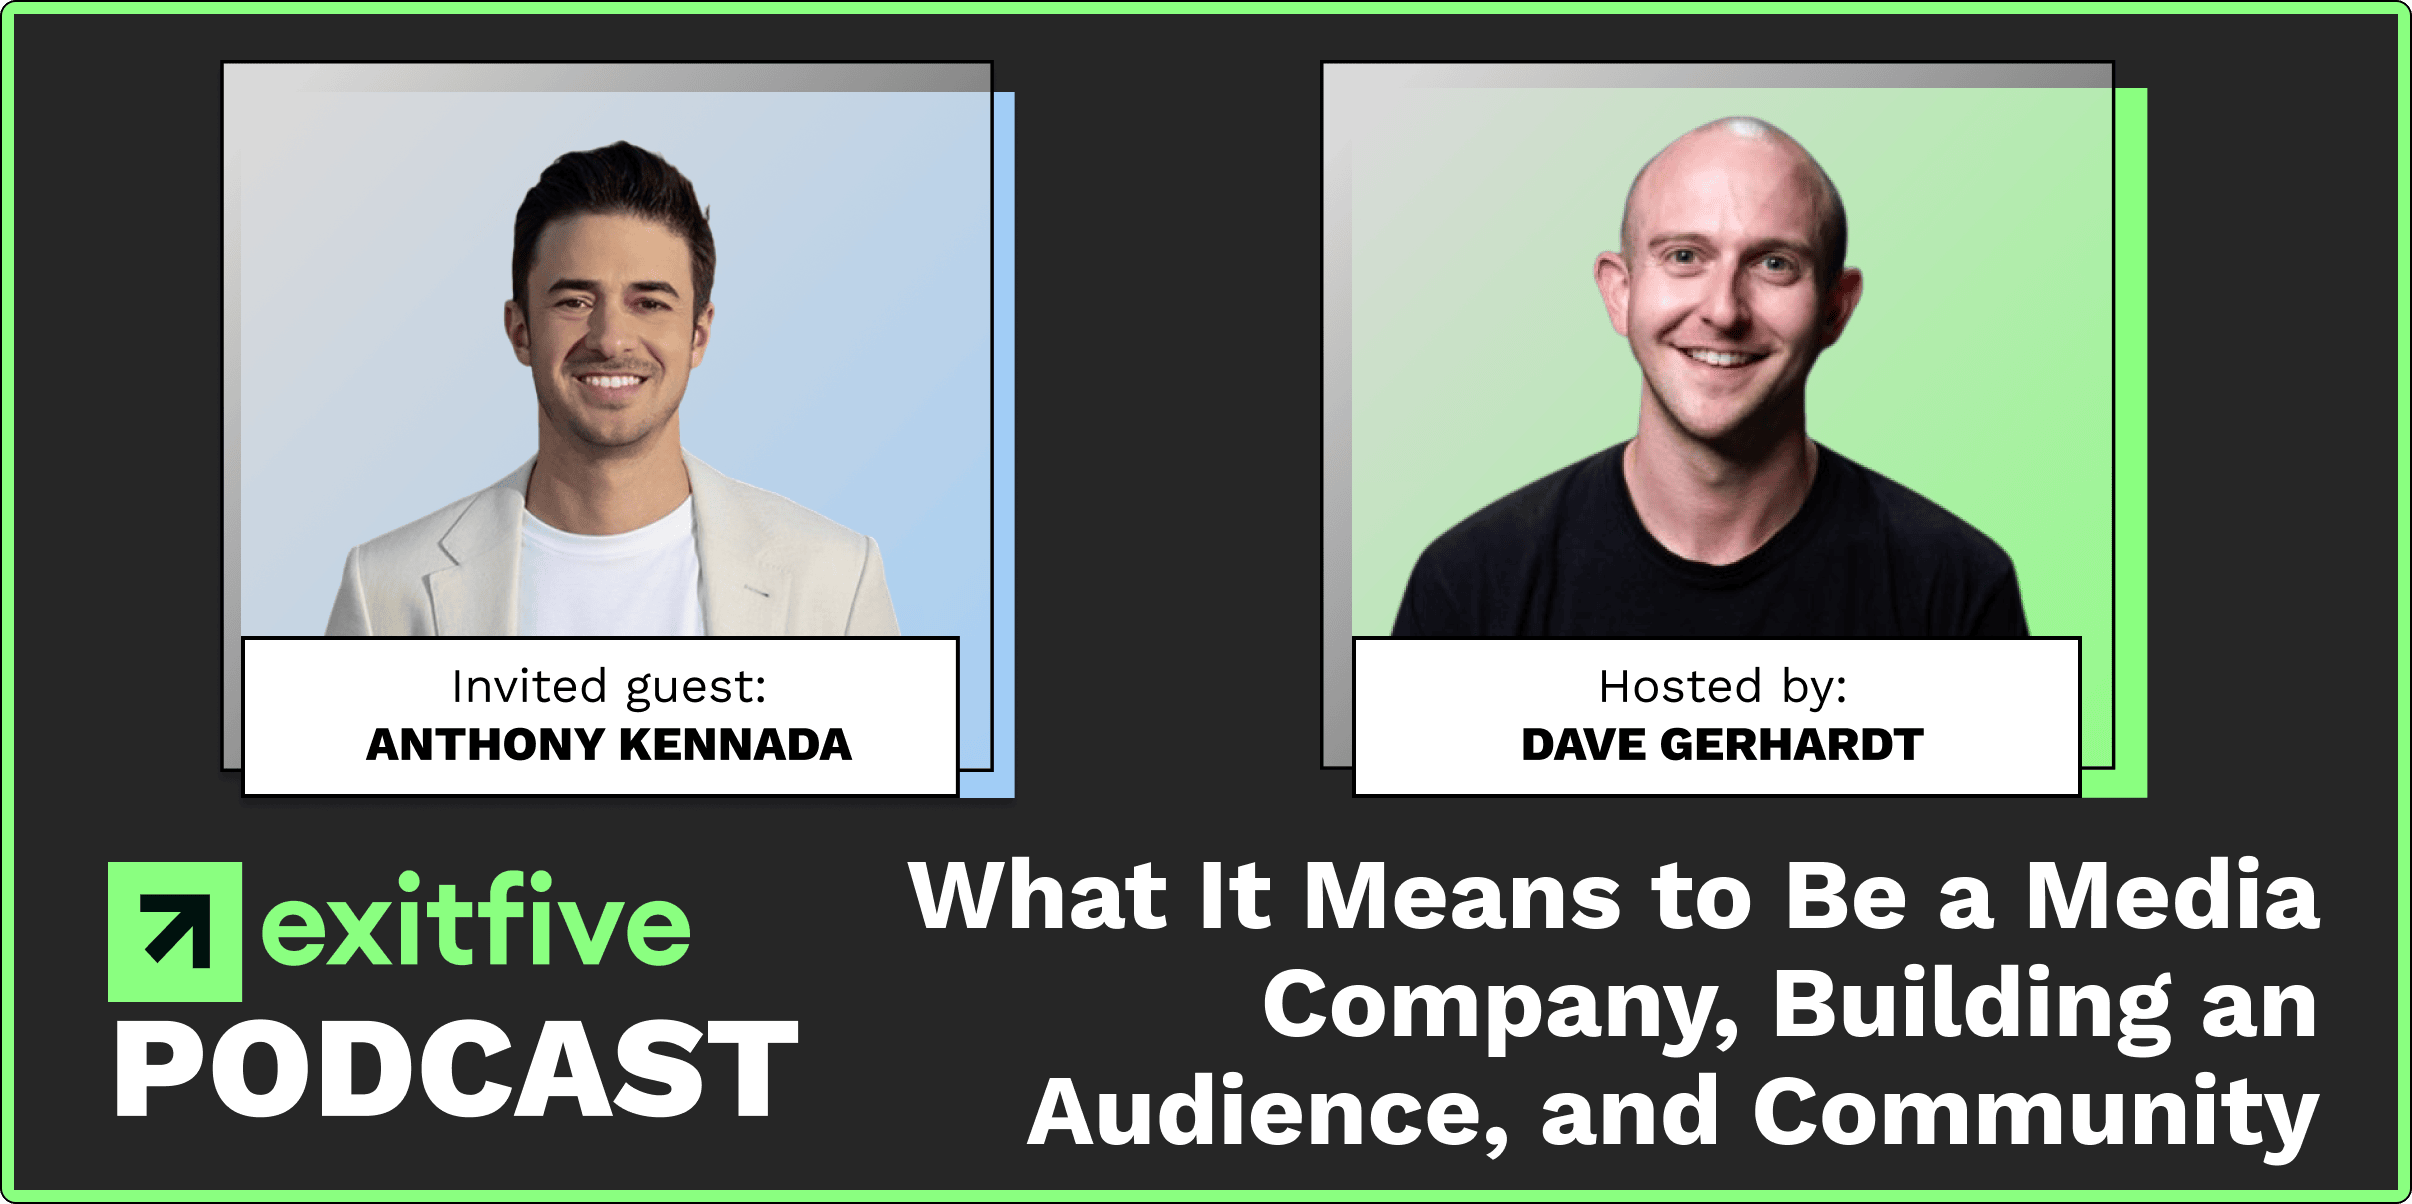 Content | What It Means to Be a Media Company, Building an Audience, and Community with Anthony Kennada